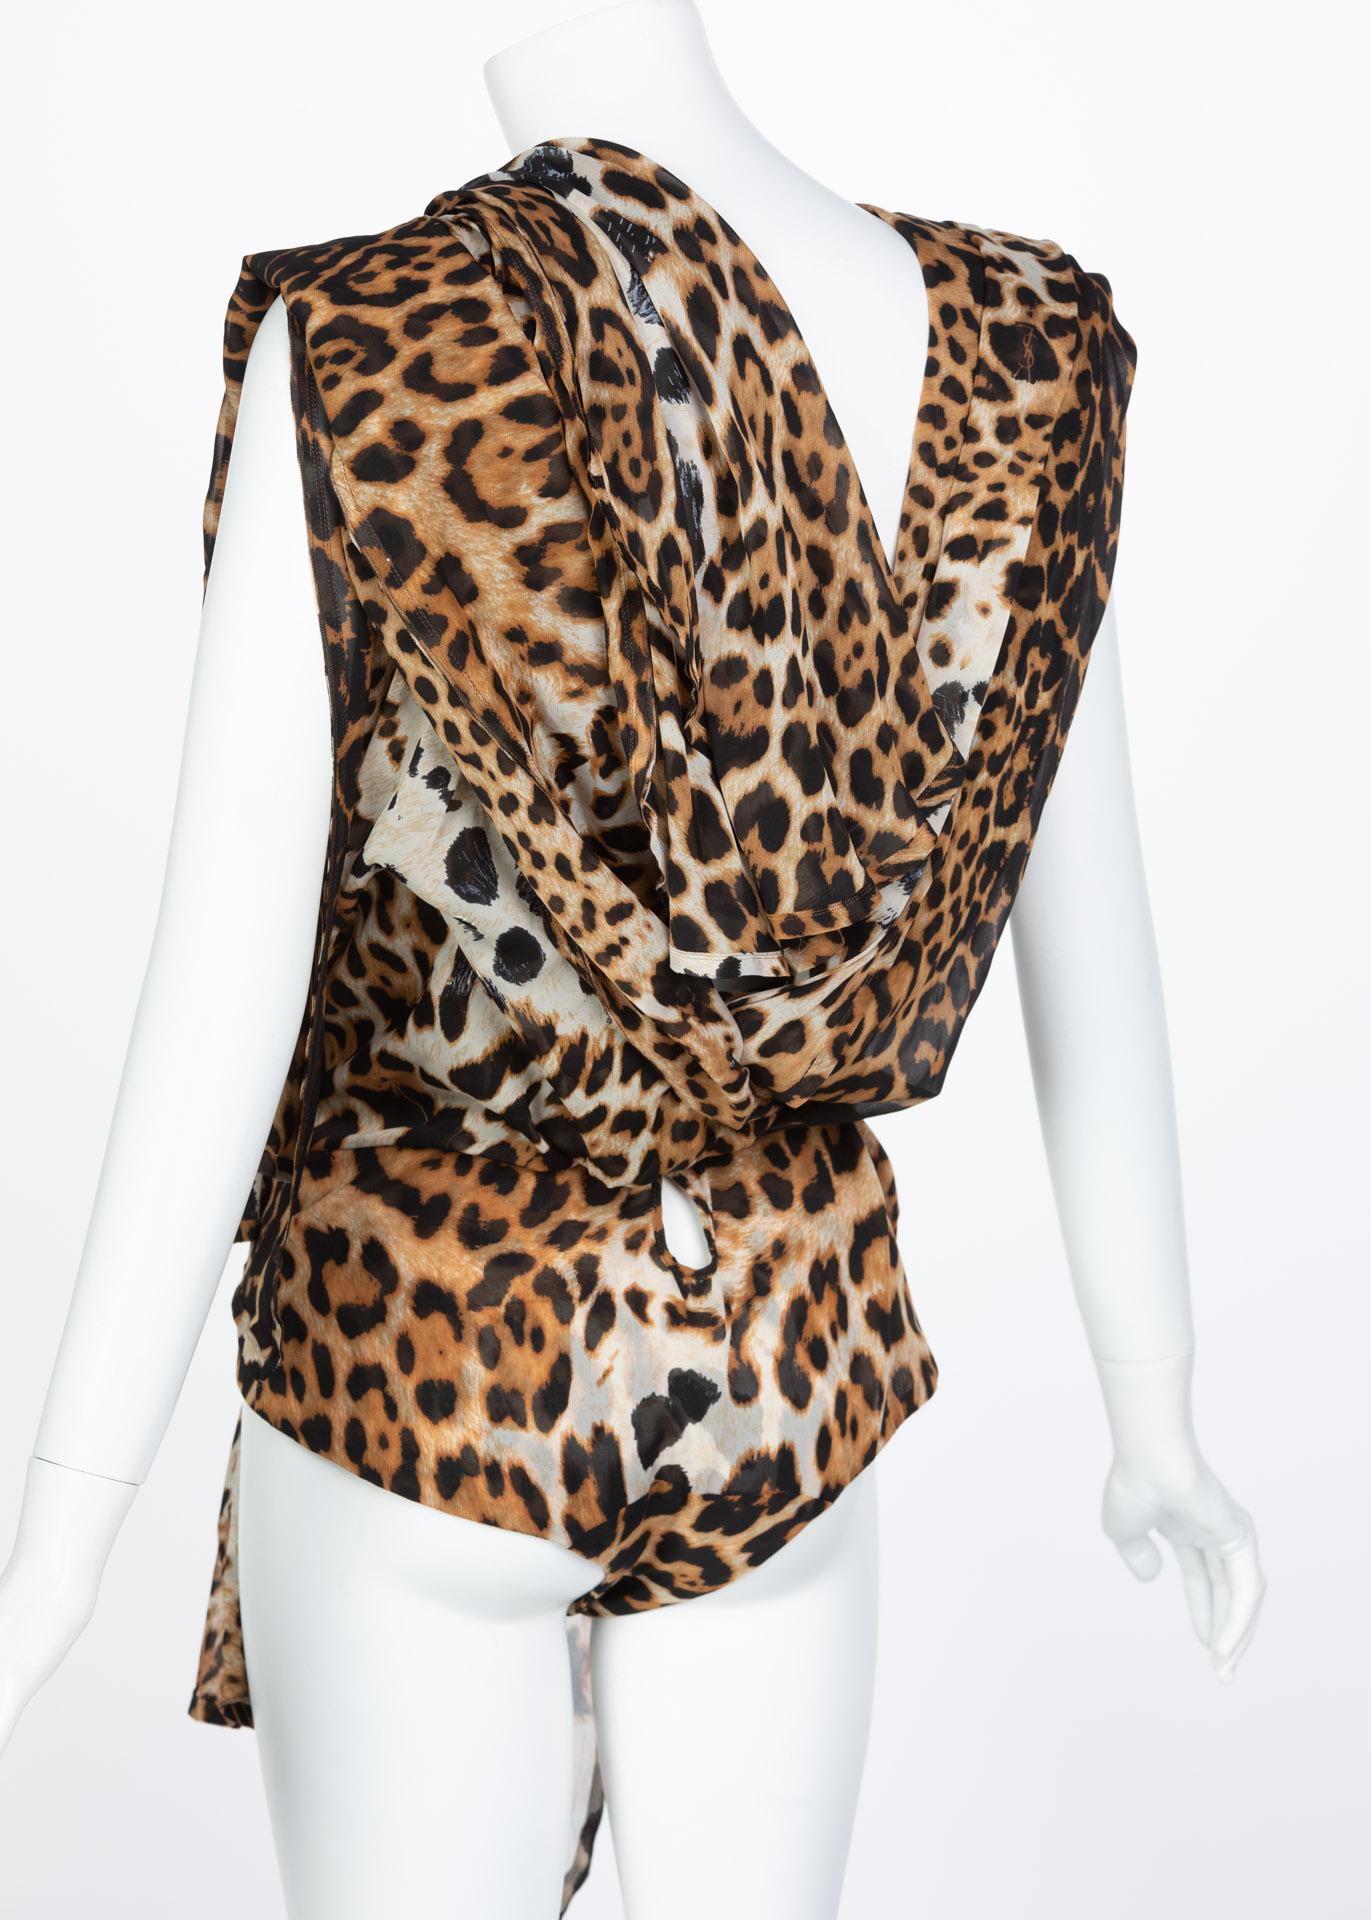  Yves Saint Laurent by Tom Ford Silk Leopard Cut Out Maxi Dress YSL, 2002  5